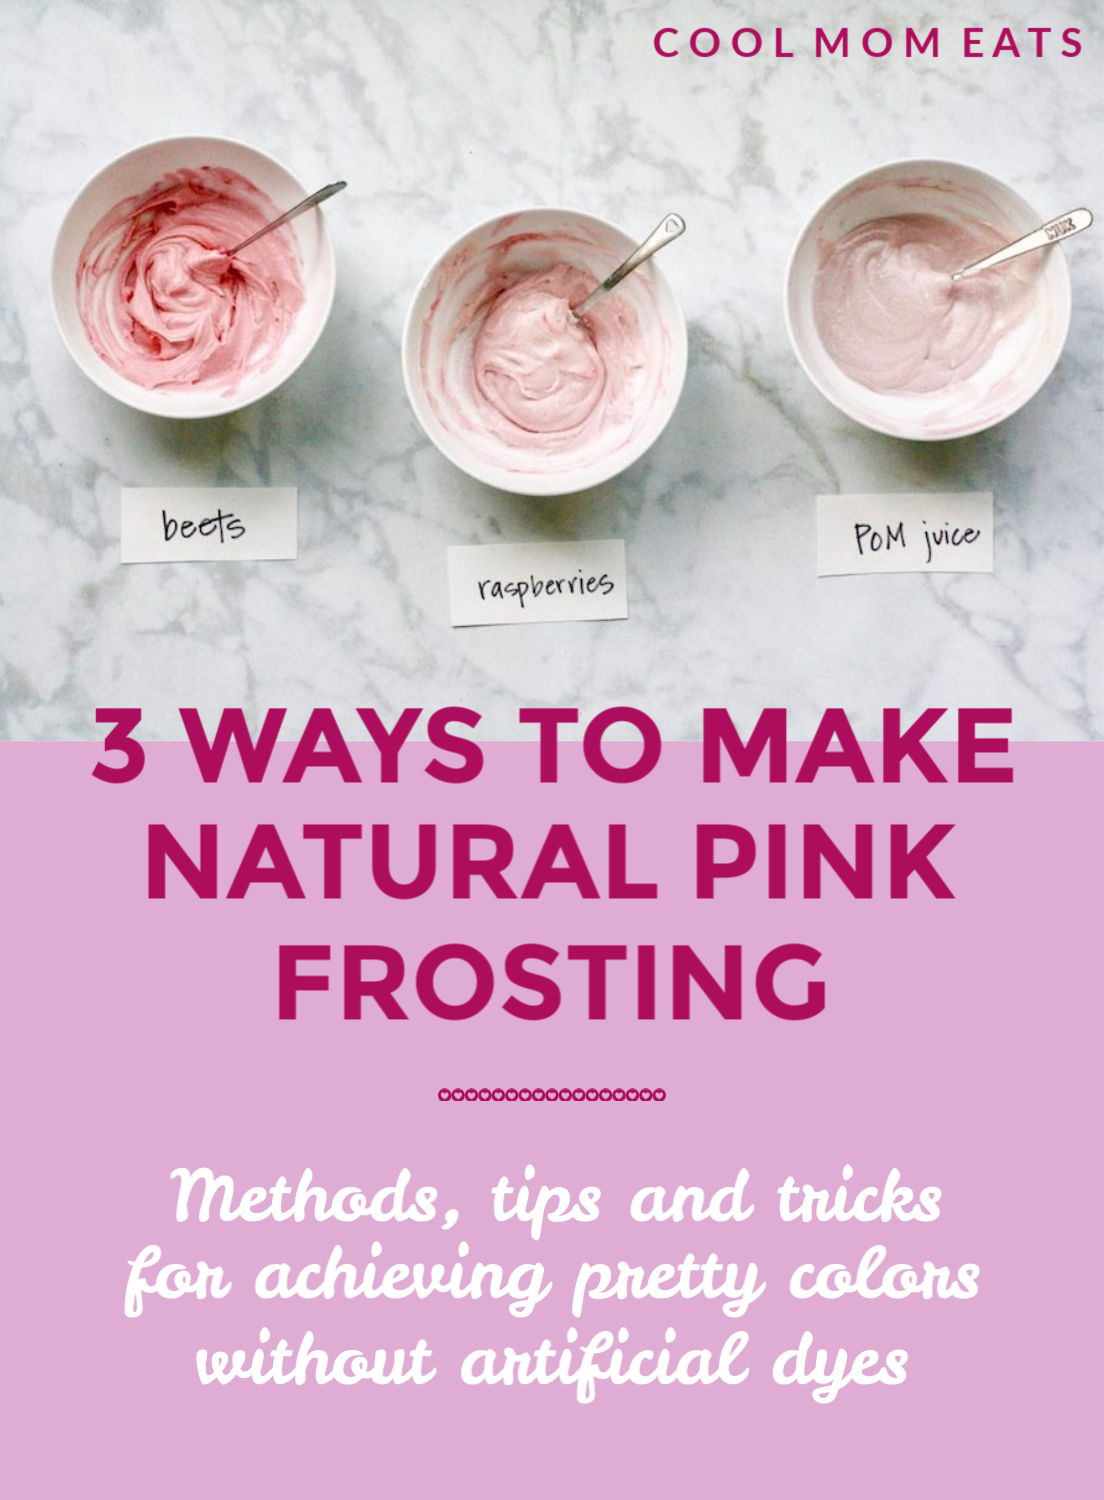 How to make natural pink frosting 3 ways: Cool Mom Eats 